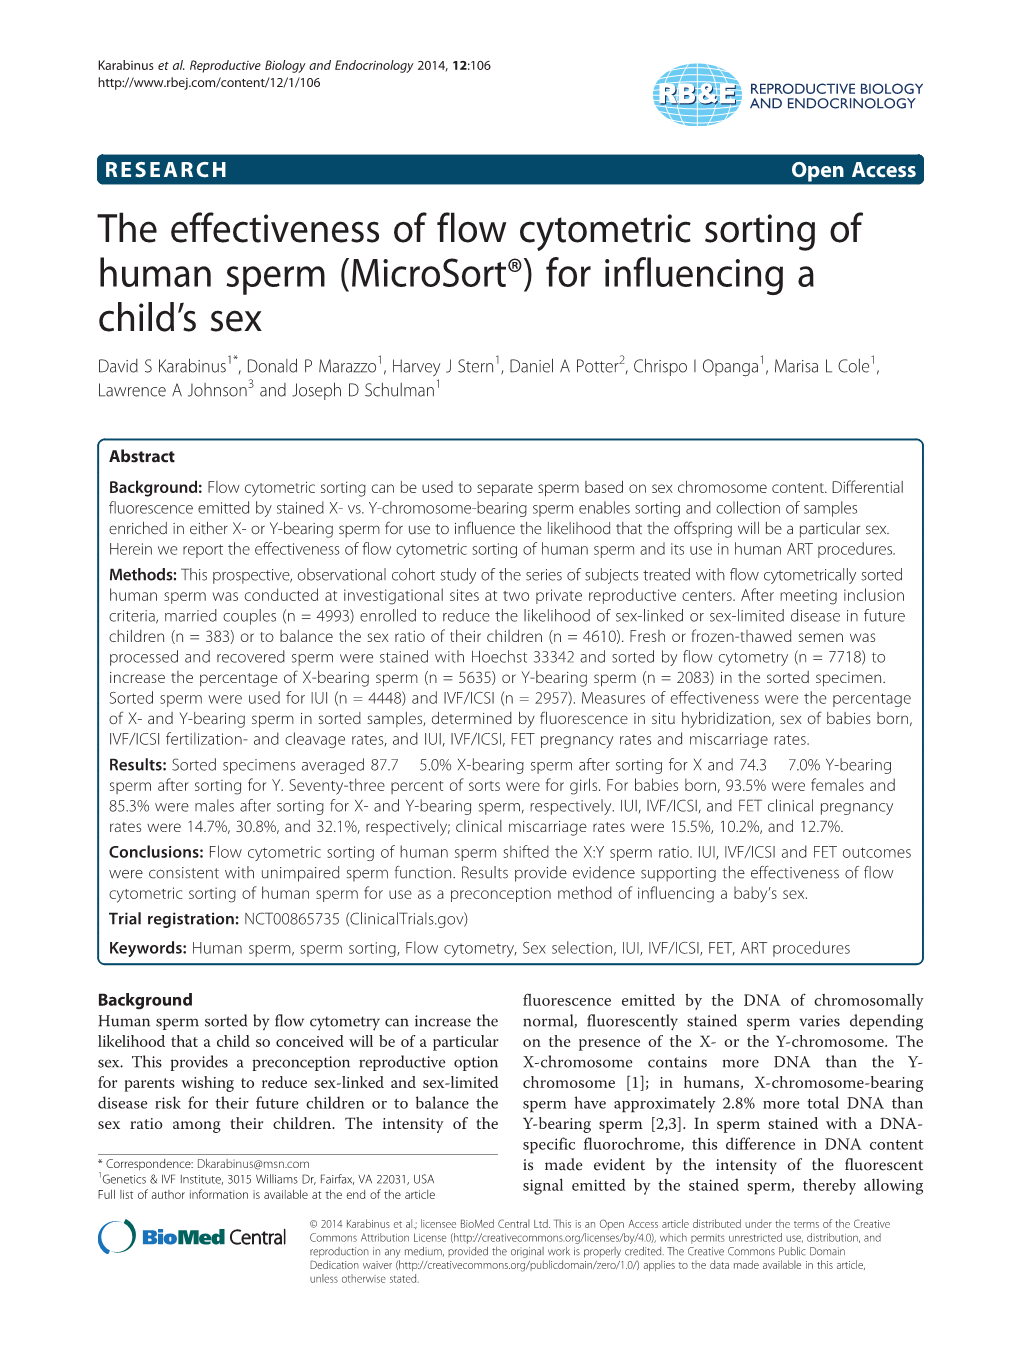 The Effectiveness of Flow Cytometric Sorting of Human Sperm (Microsort®) for Influencing a Child's